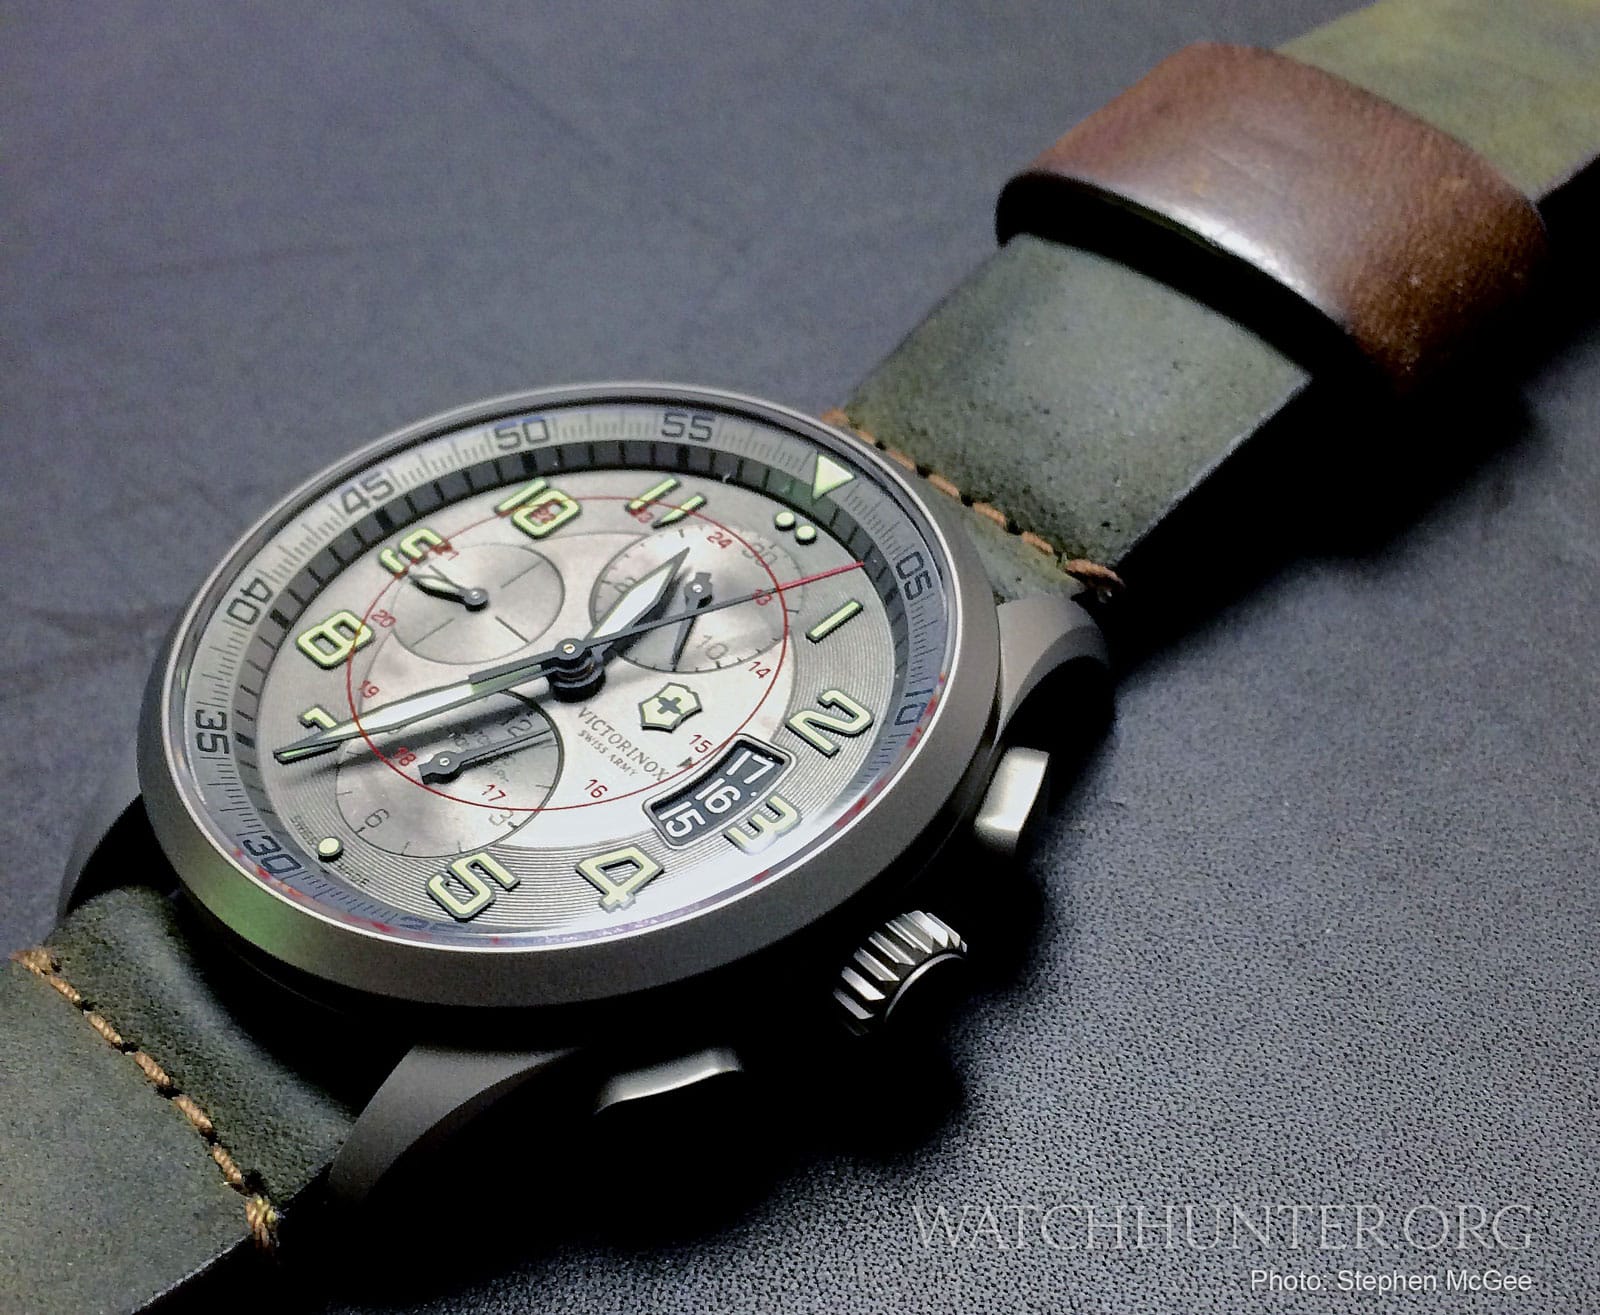 WATCH SLEUTH: Mysterious Date Wheel Dots on the Victorinox Swiss Army ...